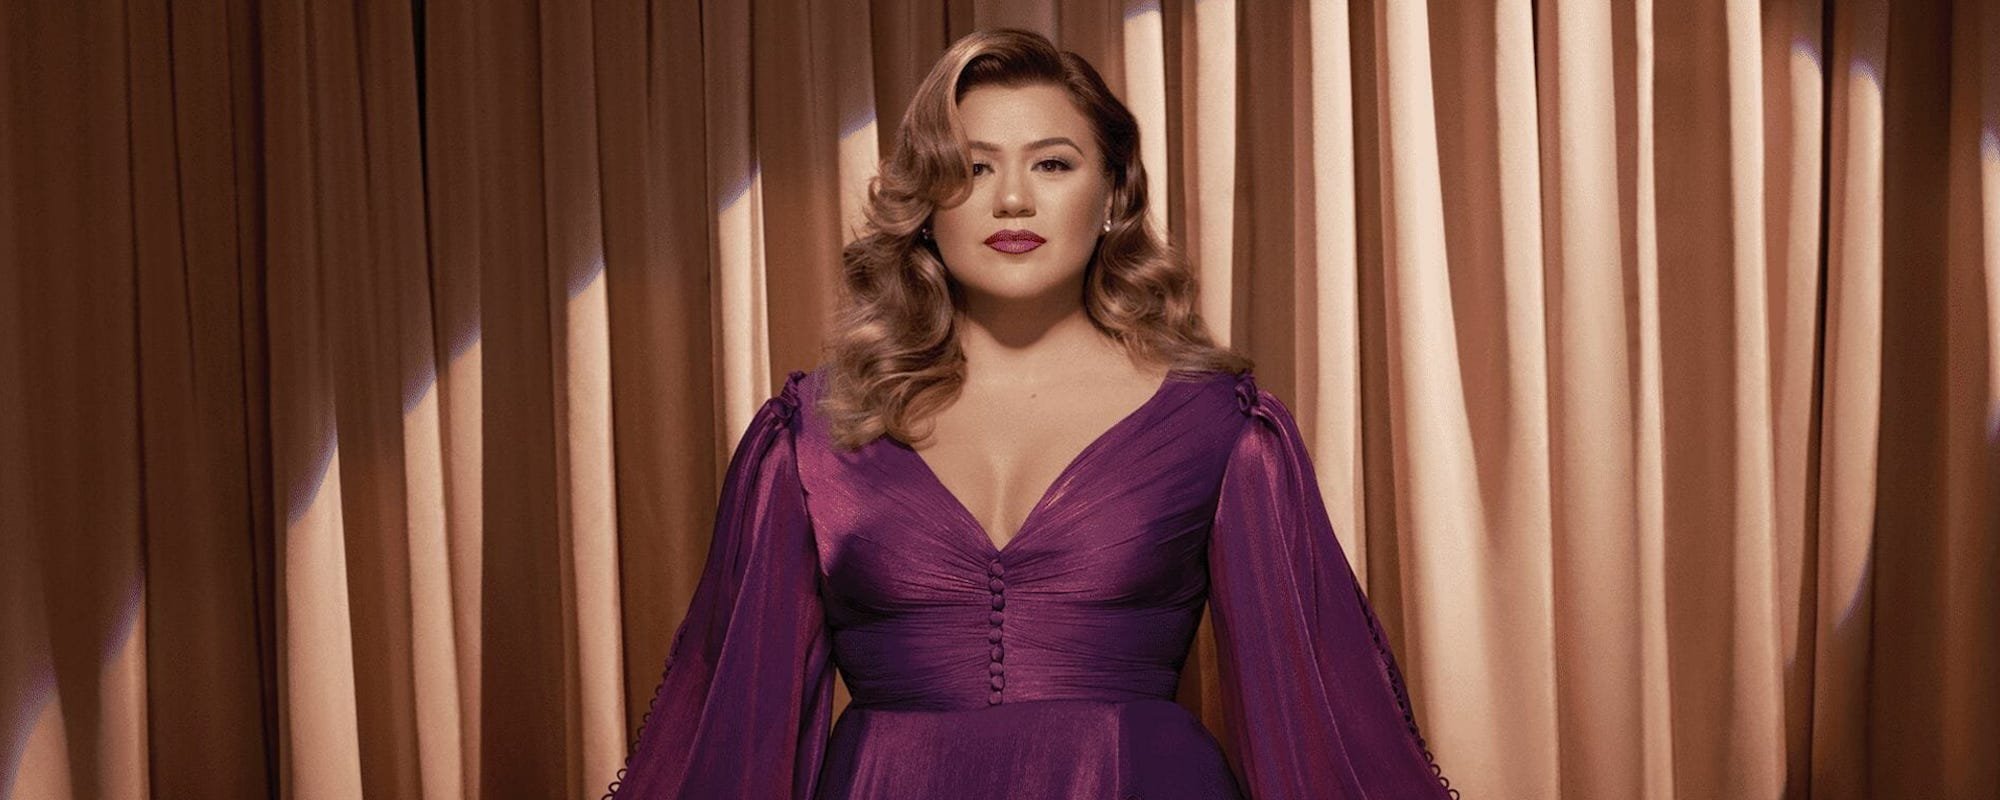 Kelly Clarkson Shares Details on New LP, Covers Blink-182 and The Staple Singers in Latest 'Kellyoke'